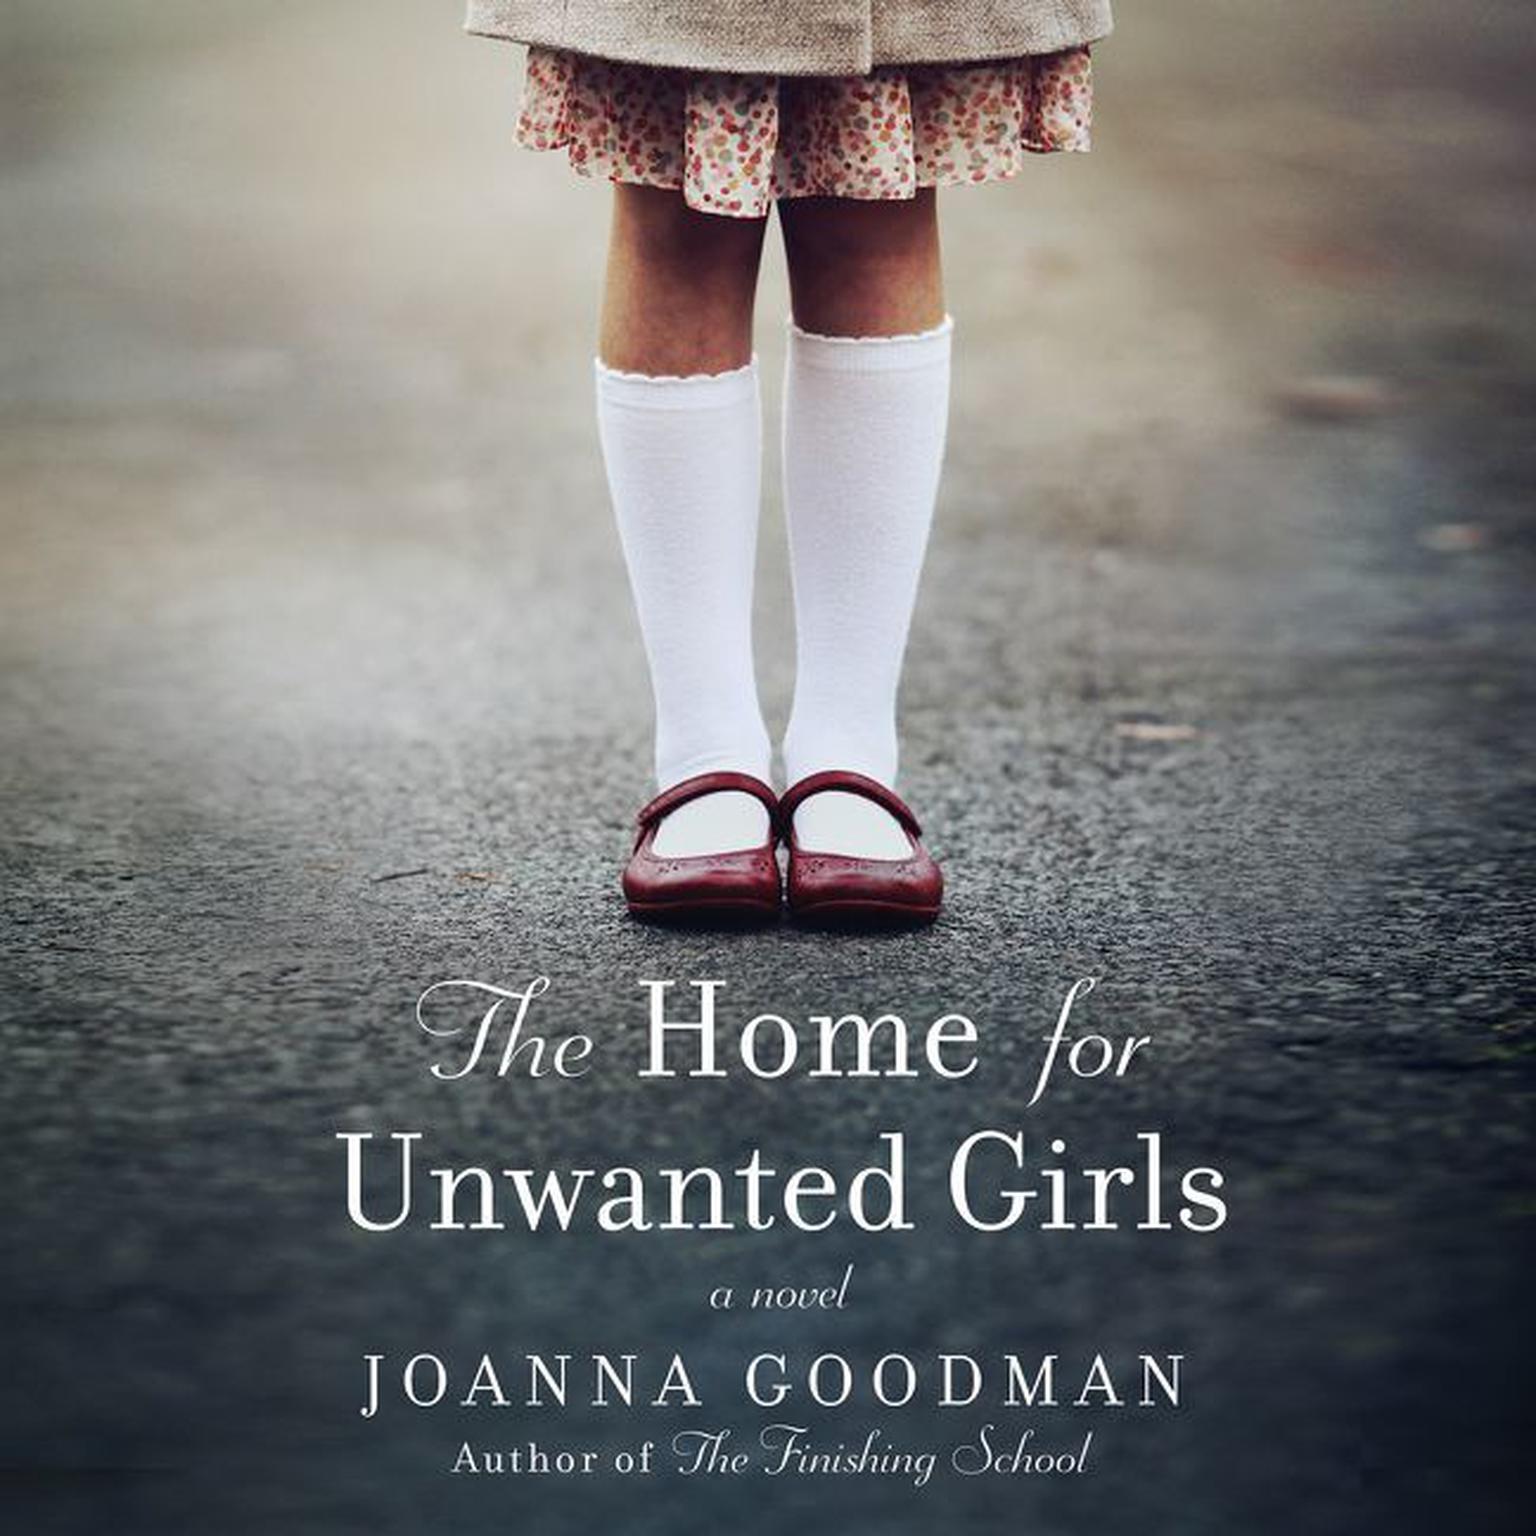 The Home for Unwanted Girls: The heart-wrenching, gripping story of a mother-daughter bond that could not be broken - inspired by true events Audiobook, by Joanna Goodman